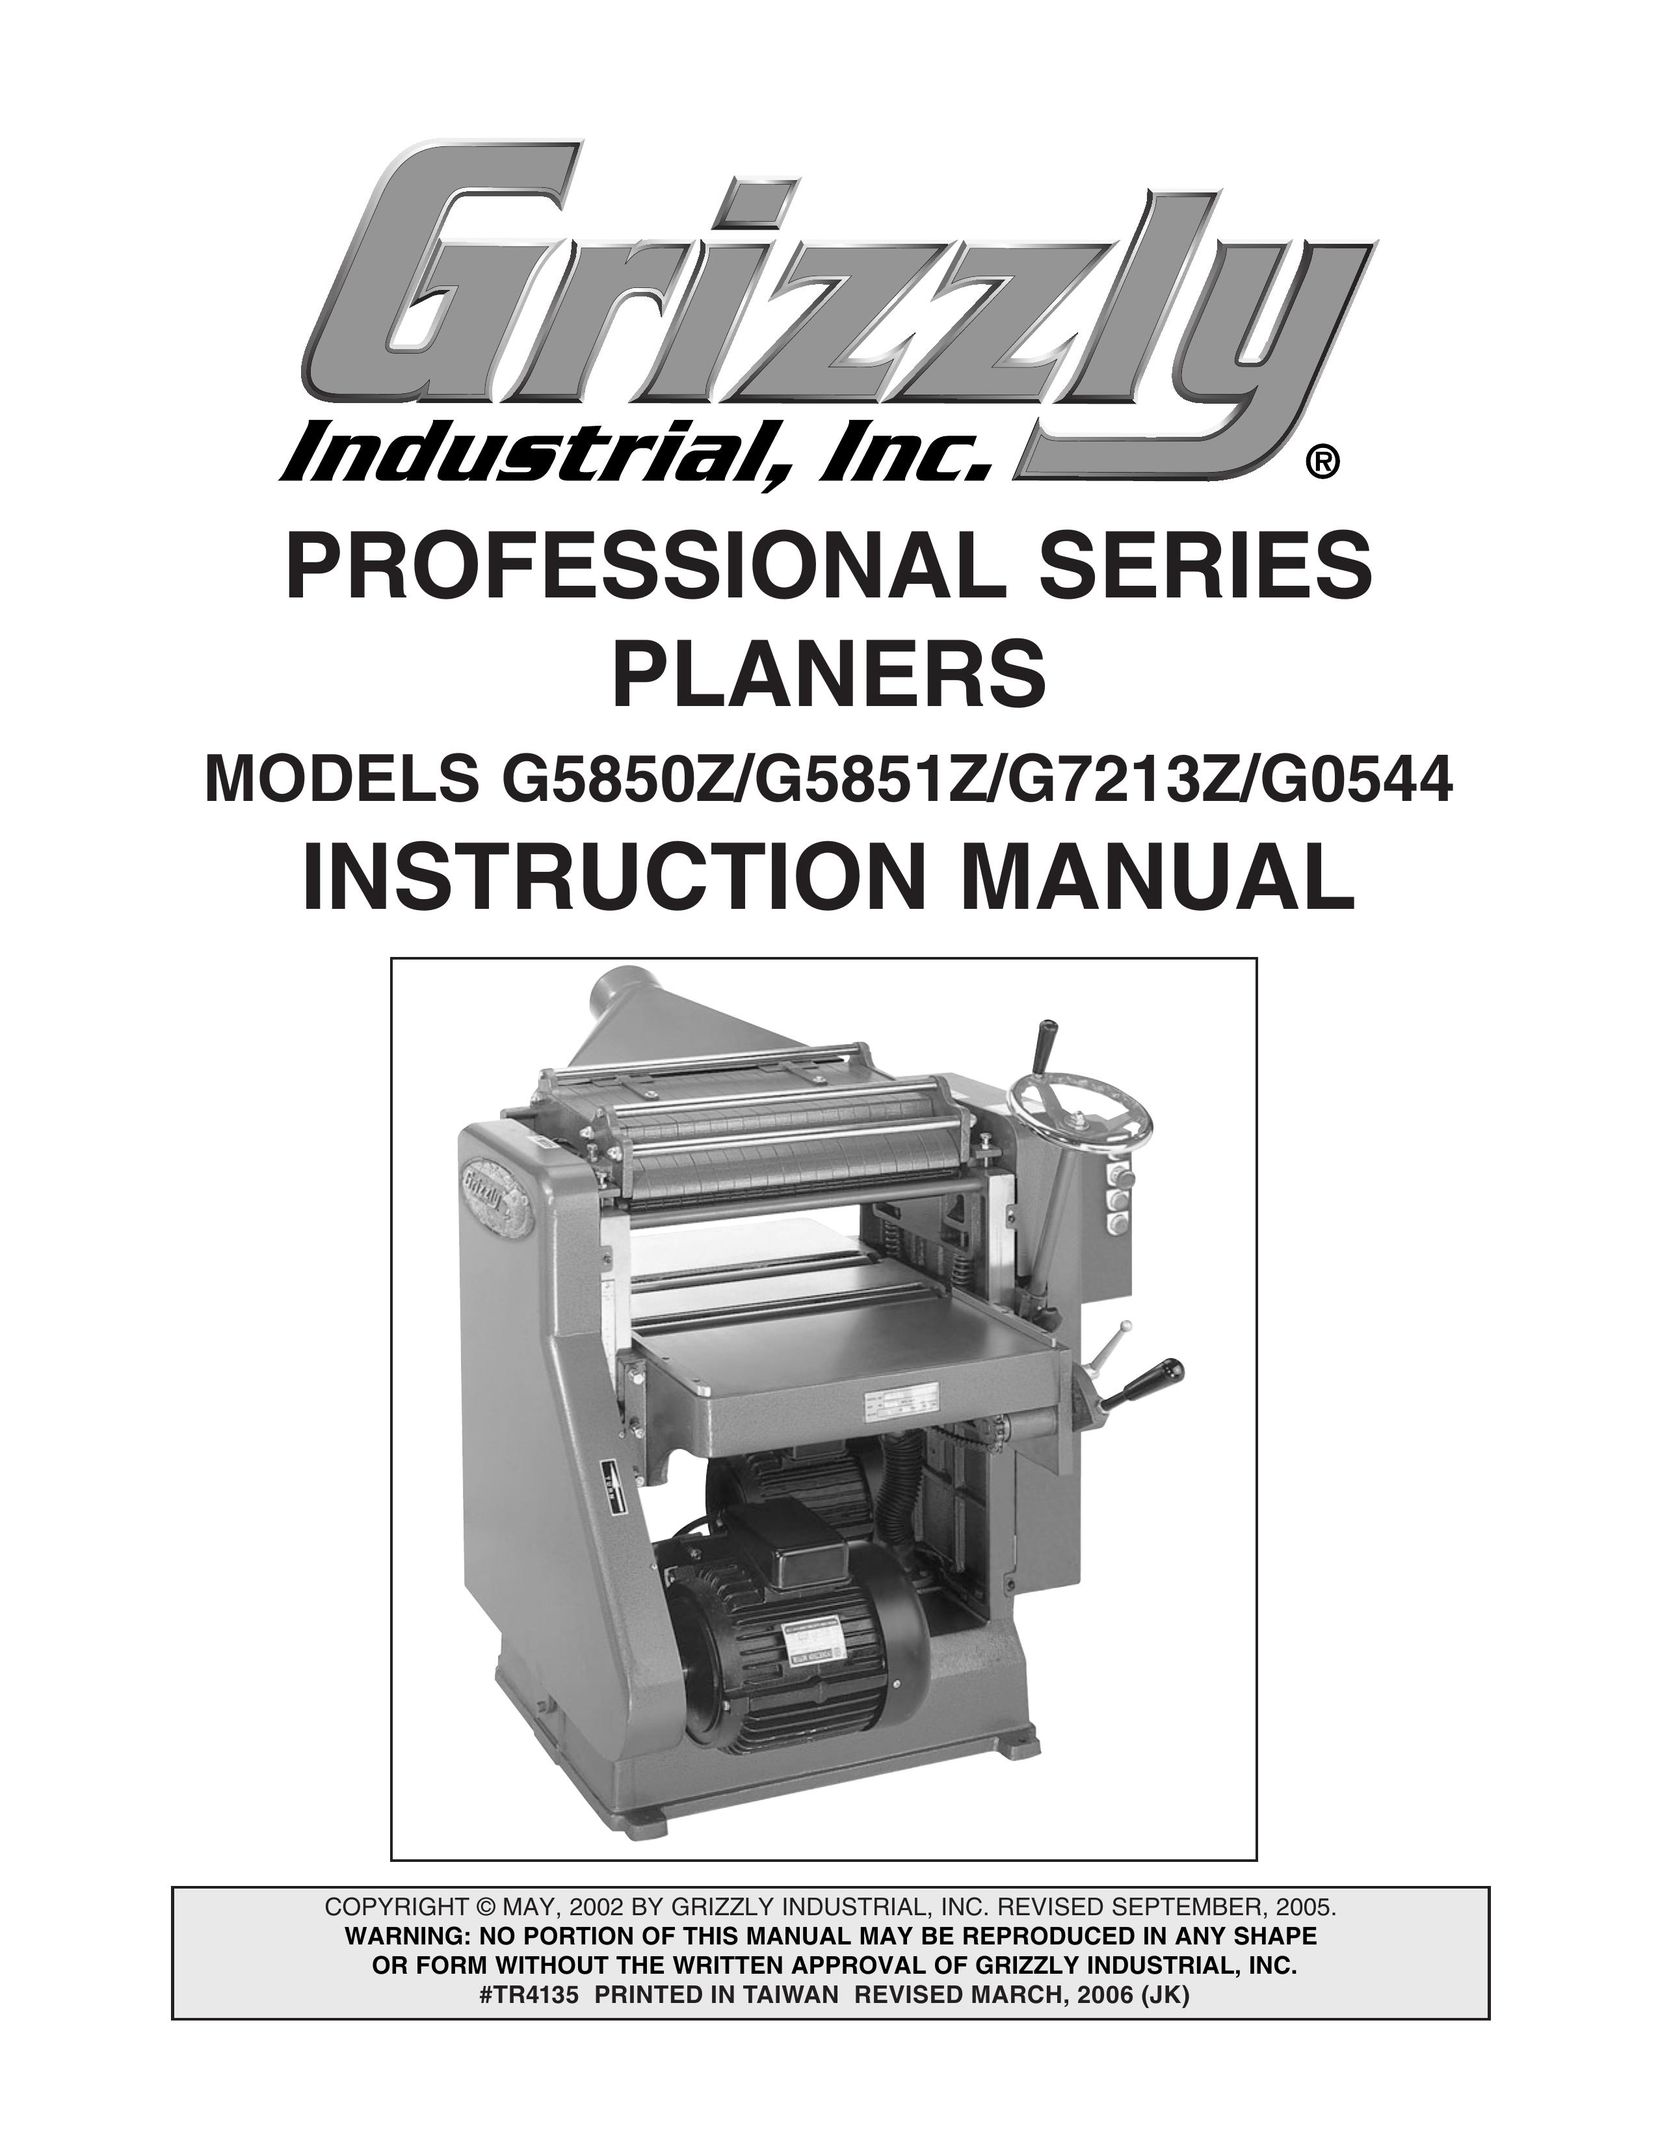 Grizzly G5850Z Planer User Manual